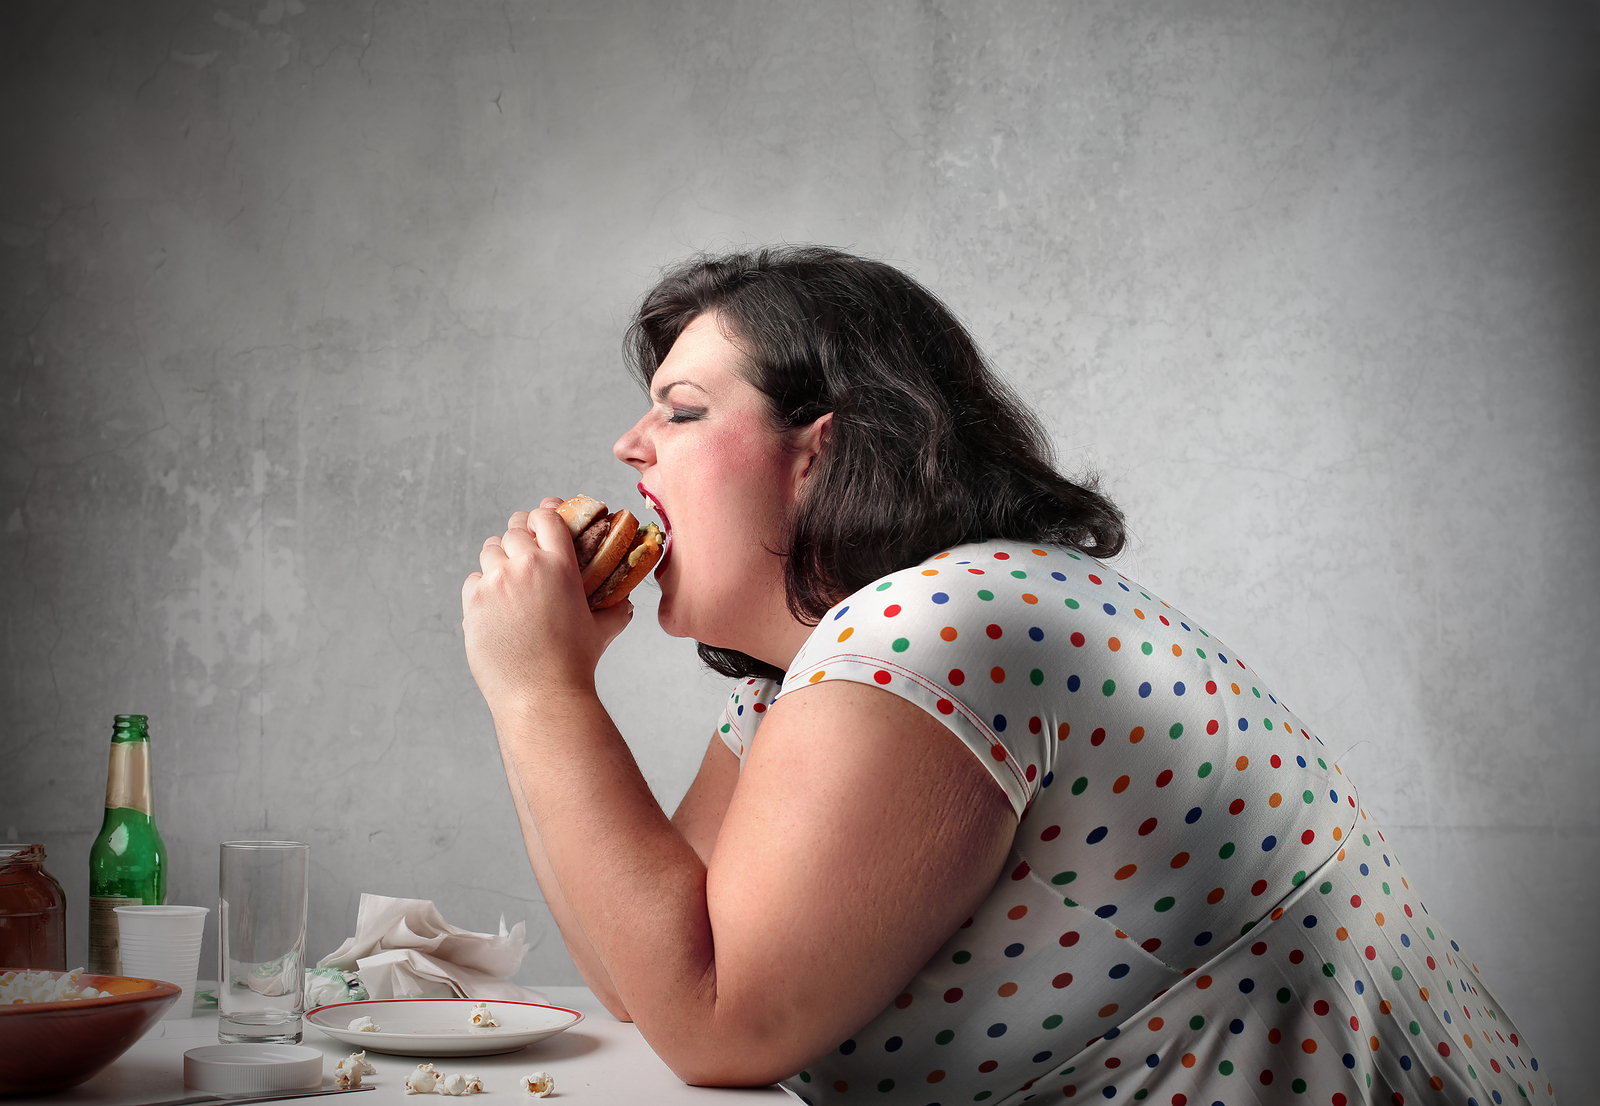 Is Stress Making You Fat?